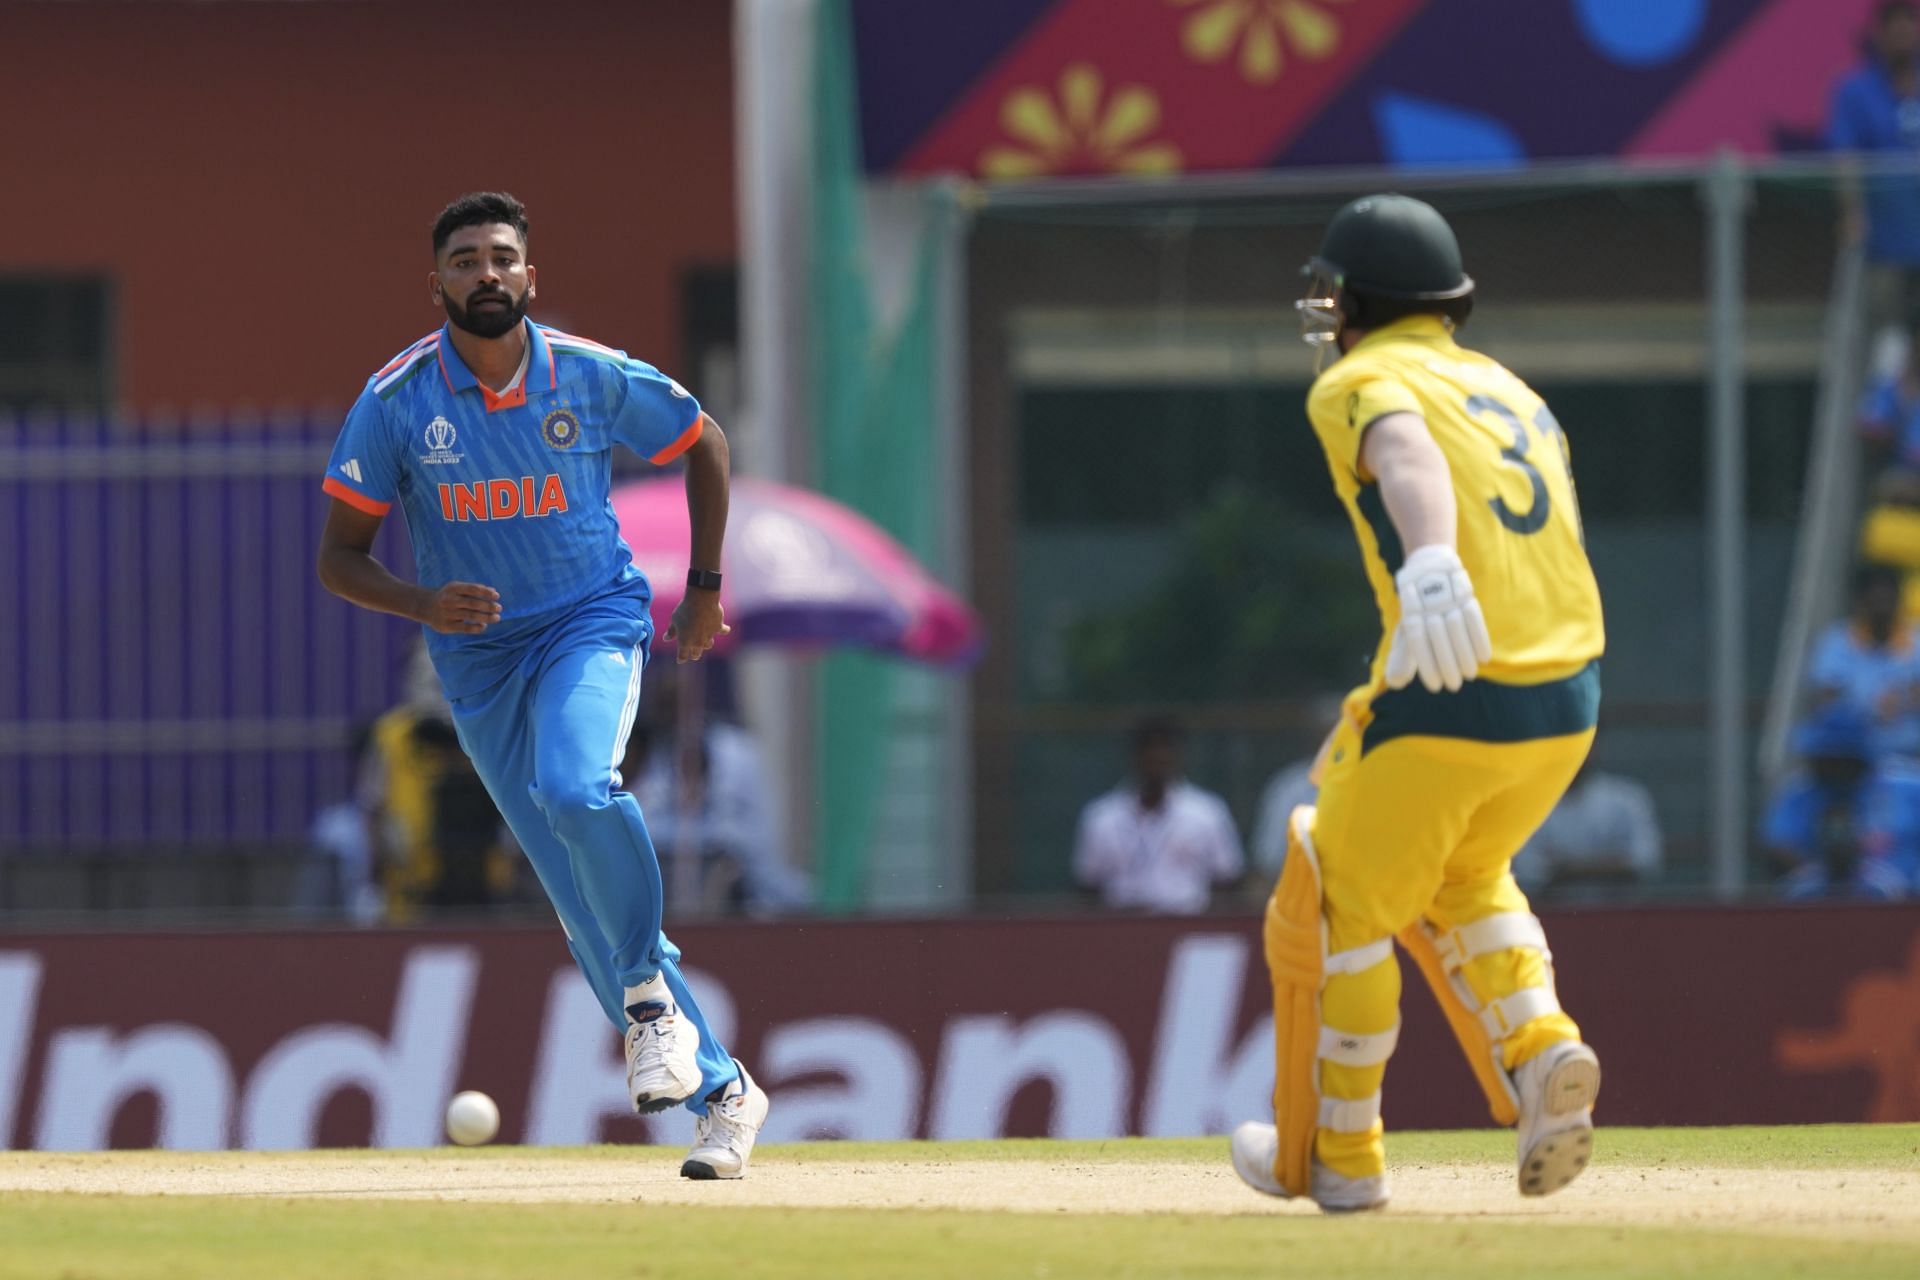 Mohammed Siraj went wicketless in his first spell. [P/C: AP]